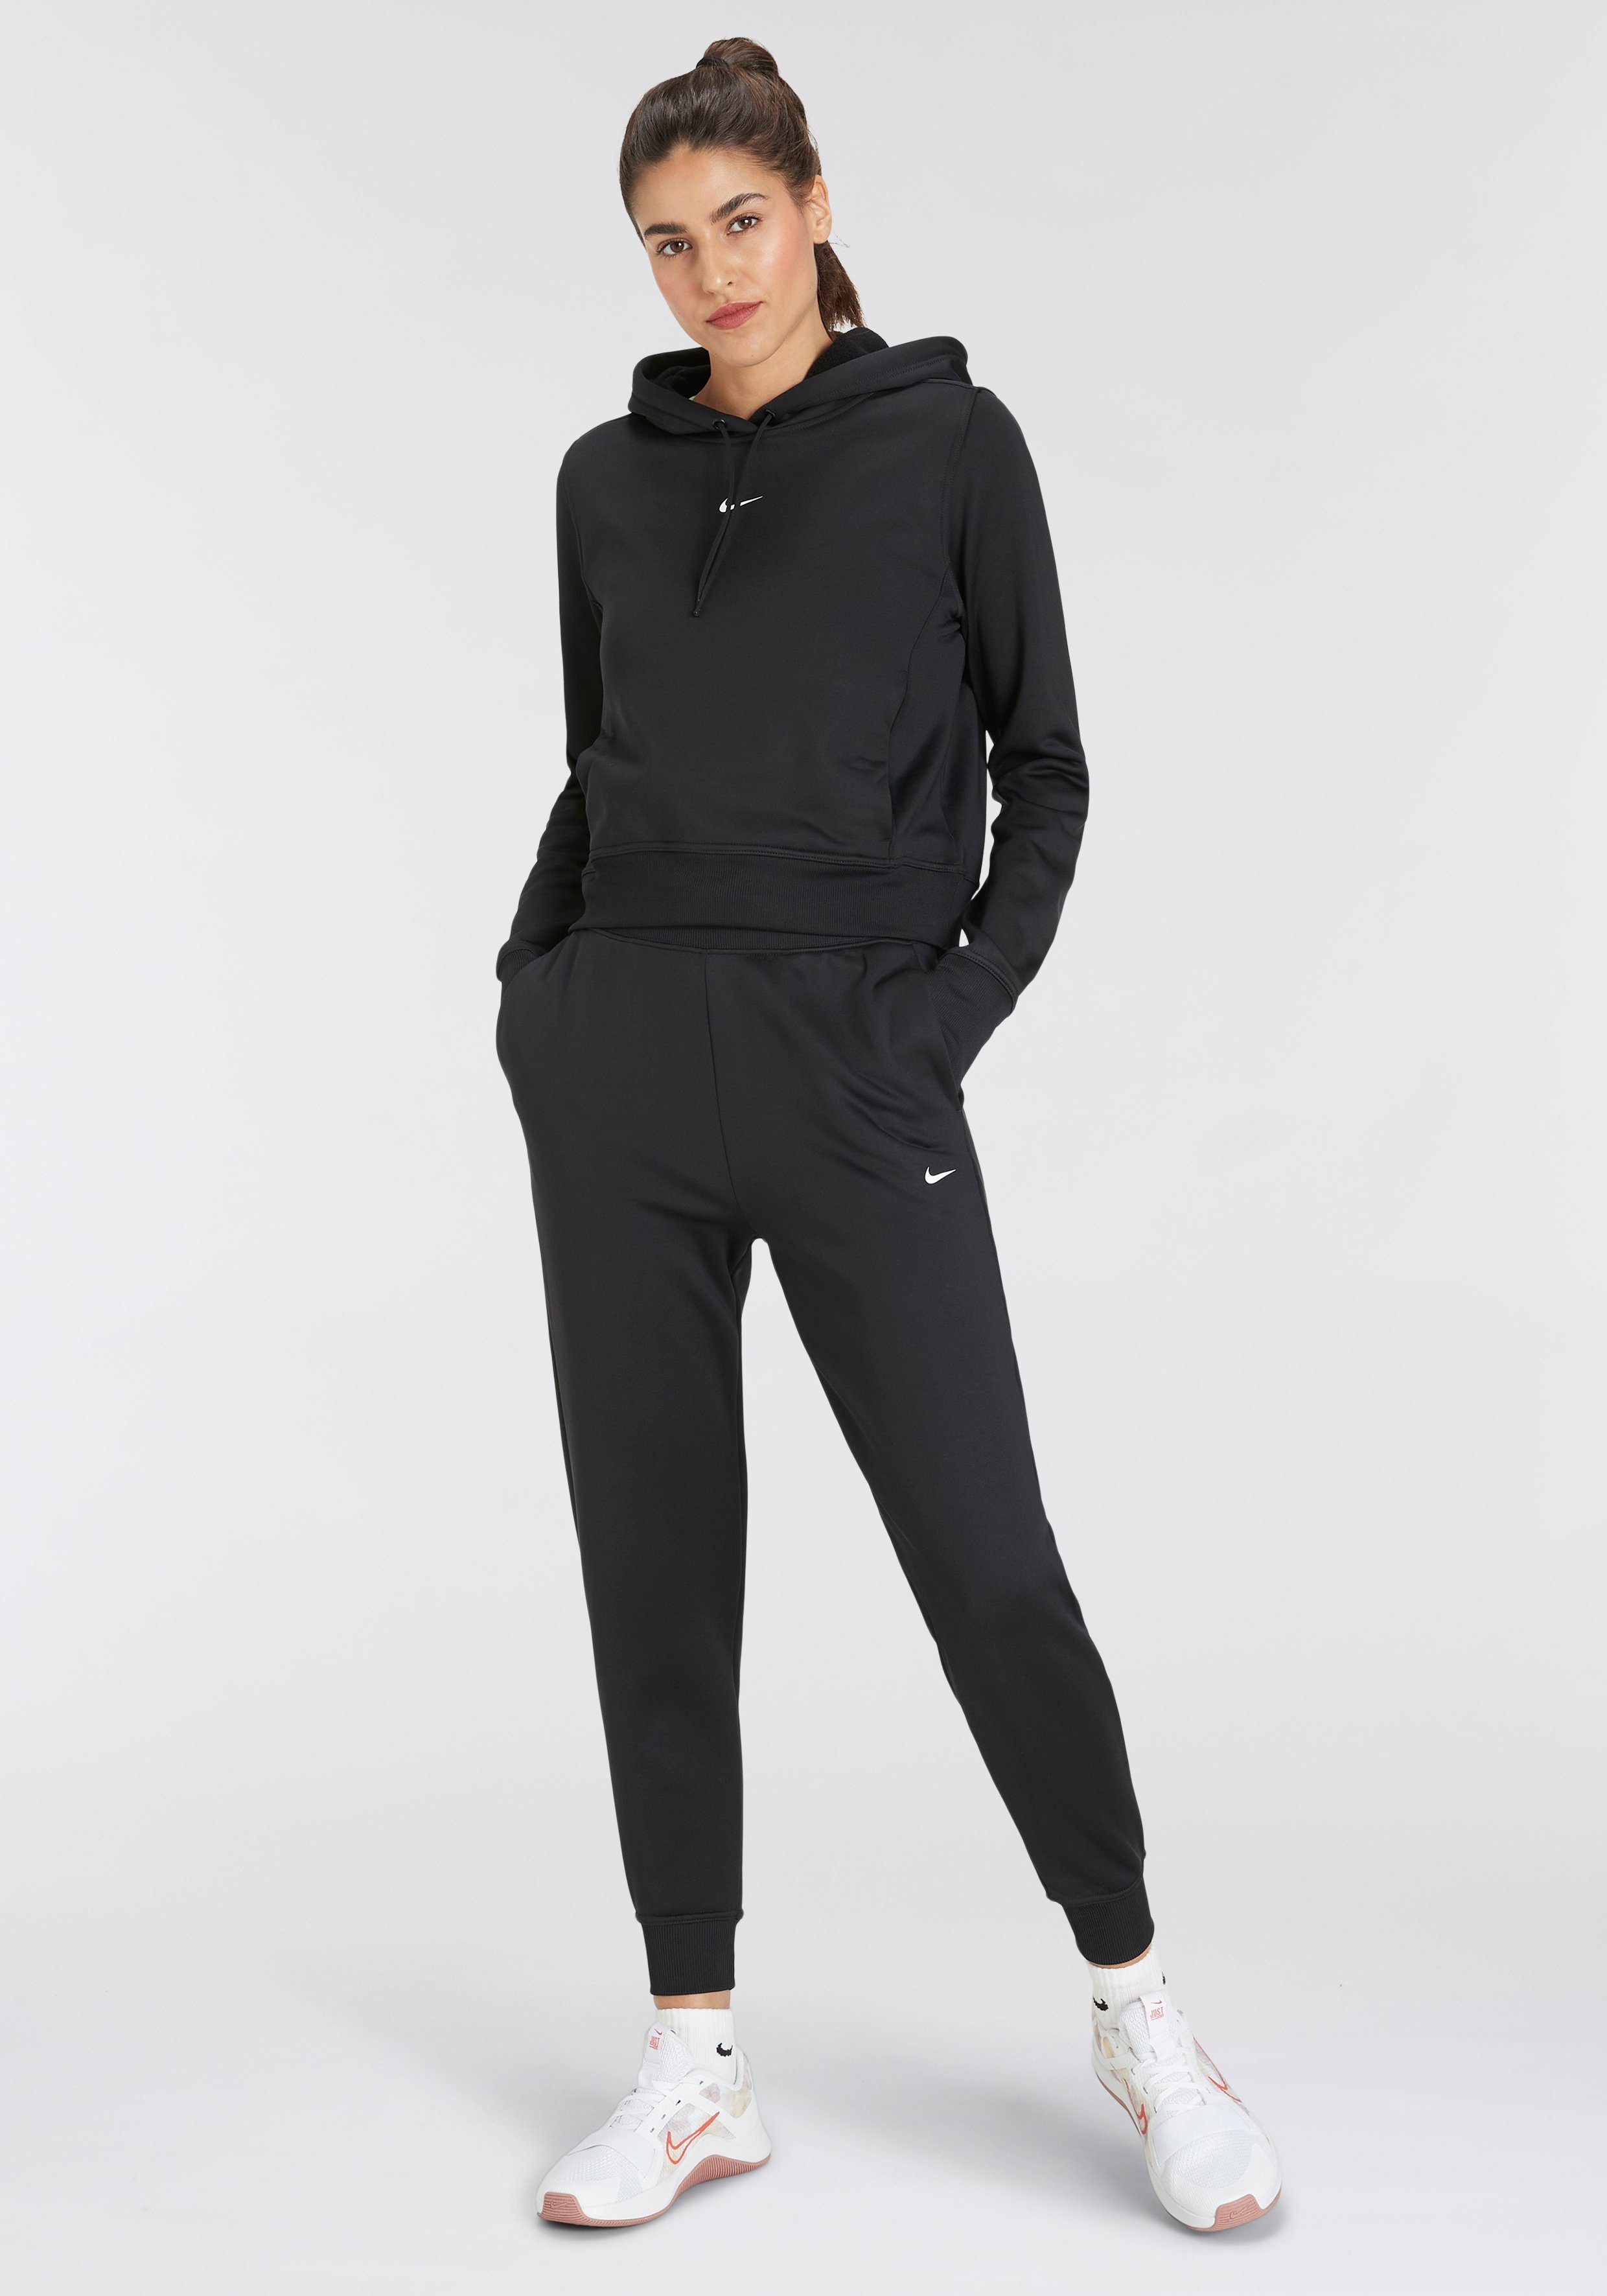 JOGGERS ONE Trainingshose Nike THERMA-FIT WOMEN'S